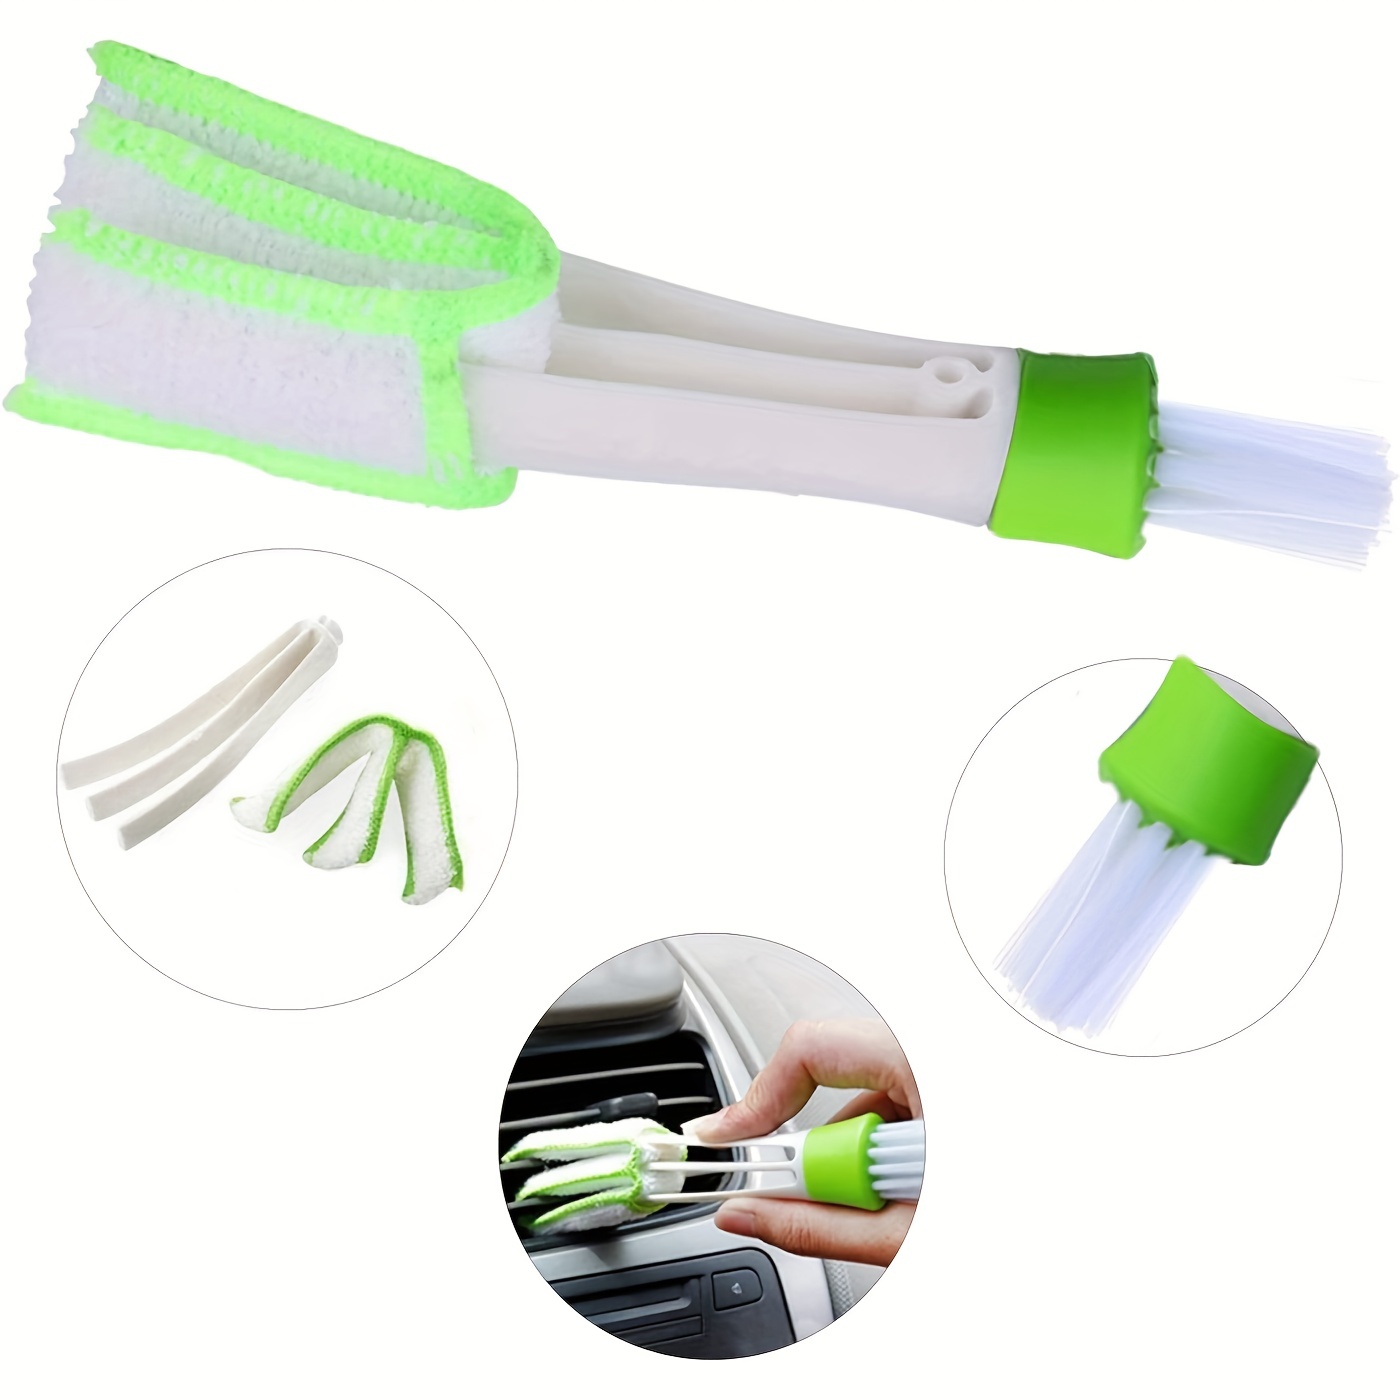  Gap Cleaning Brush, Hand-held Crevice Cleaning Brush